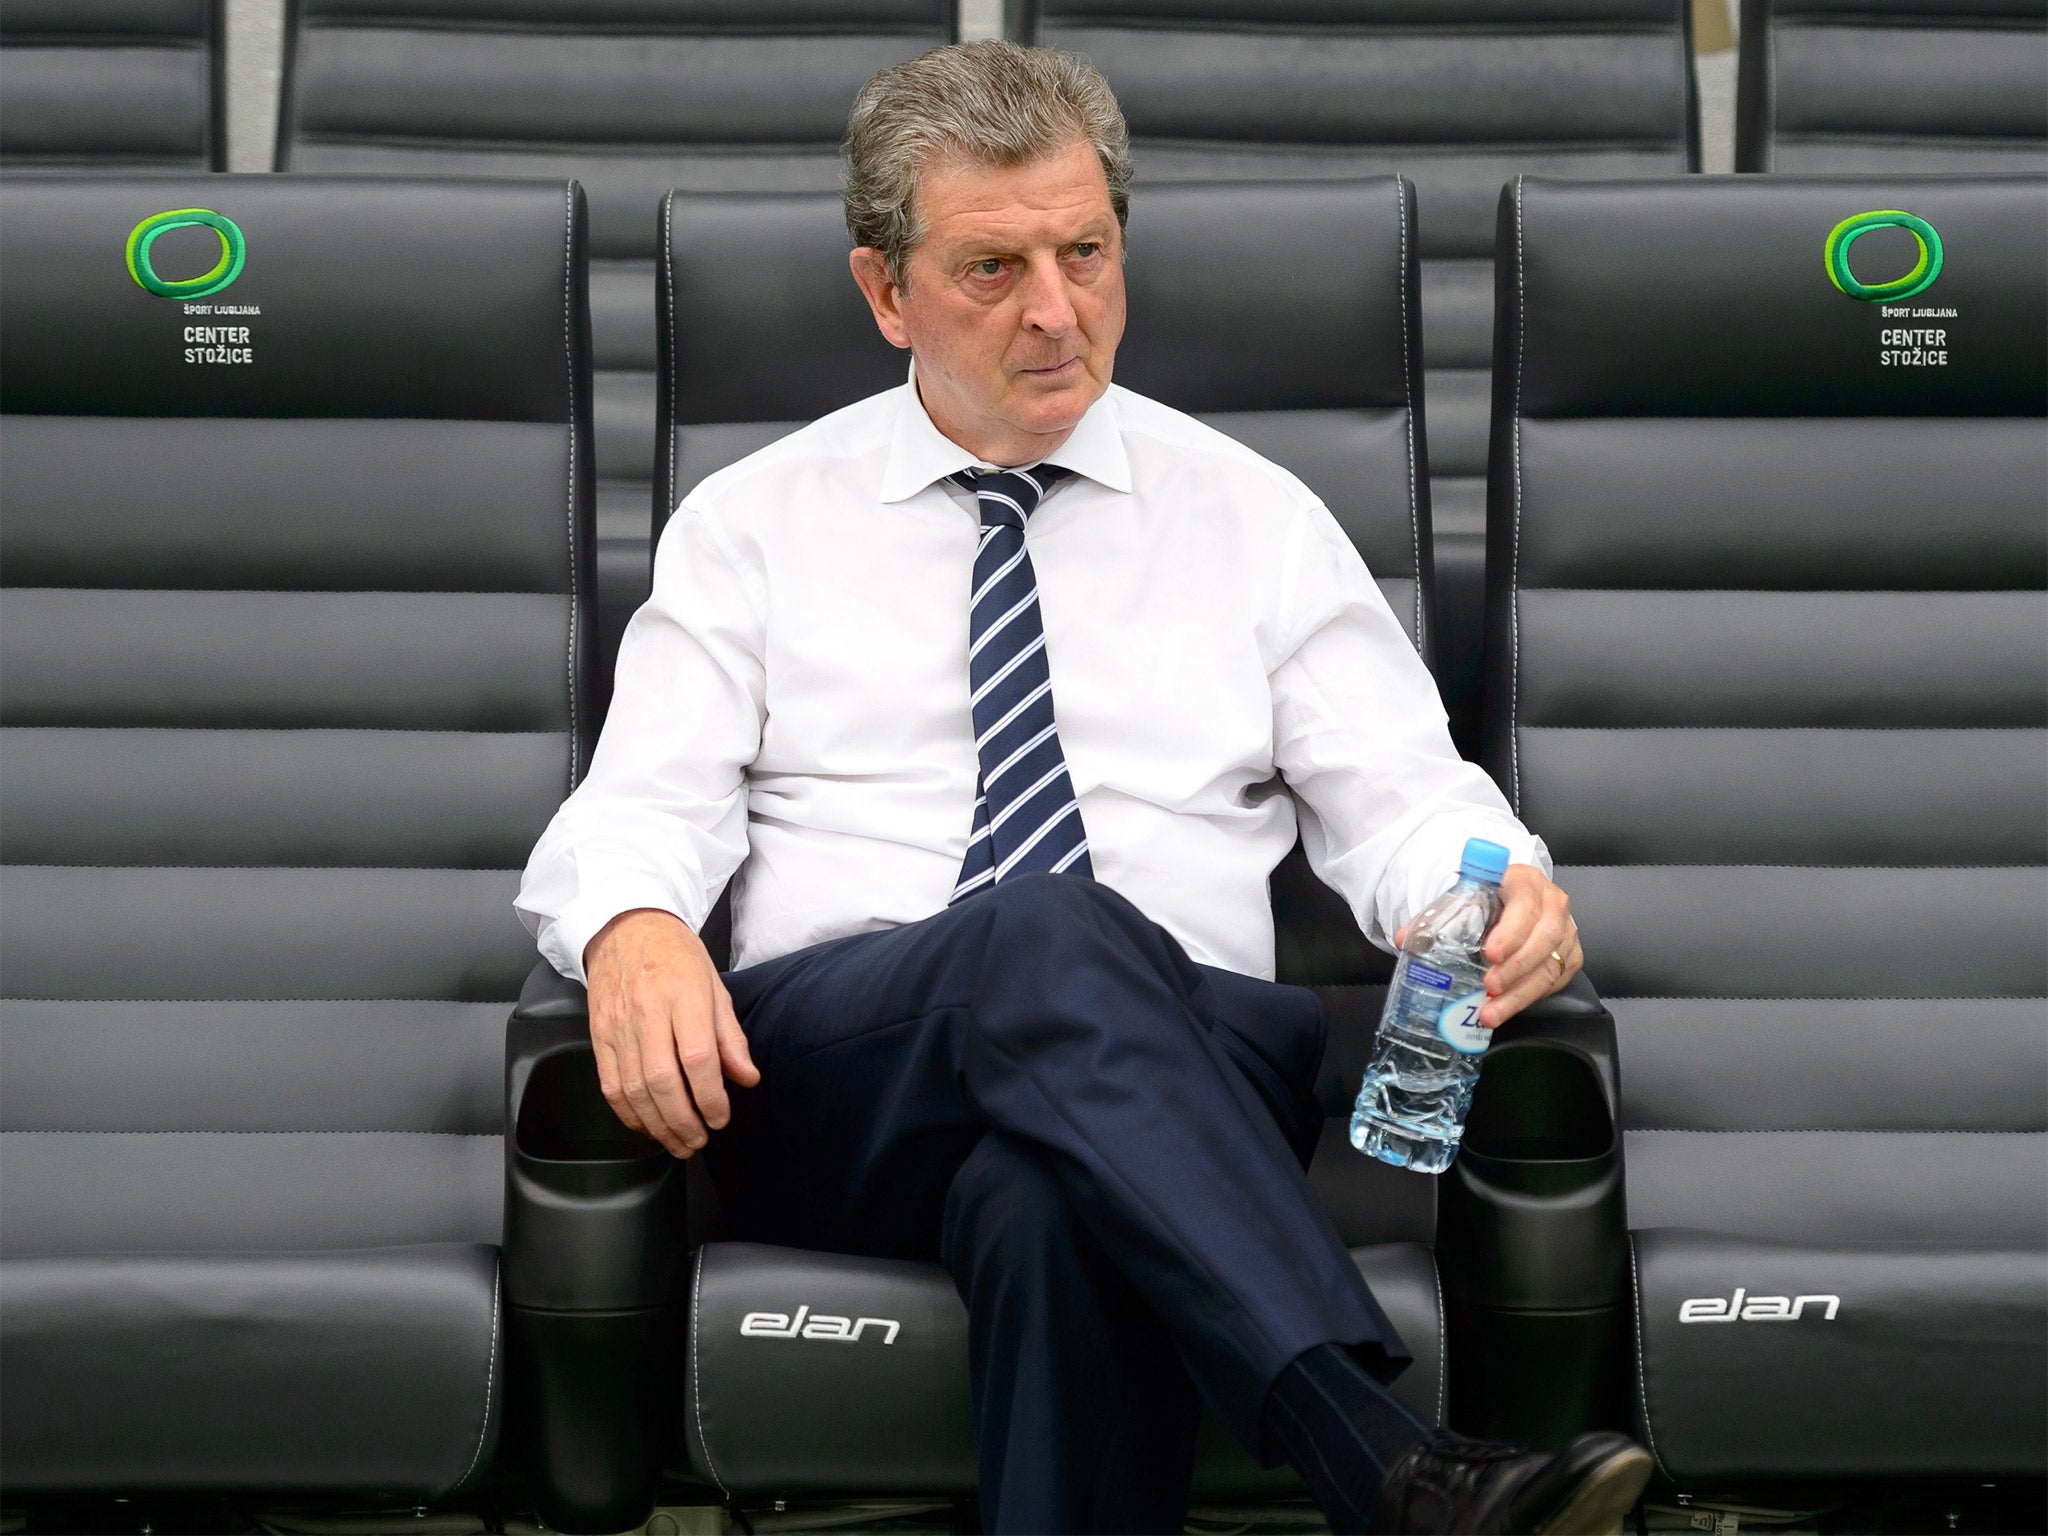 Roy Hodgson has guided England to six wins in a row in Euro 2016 qualifying